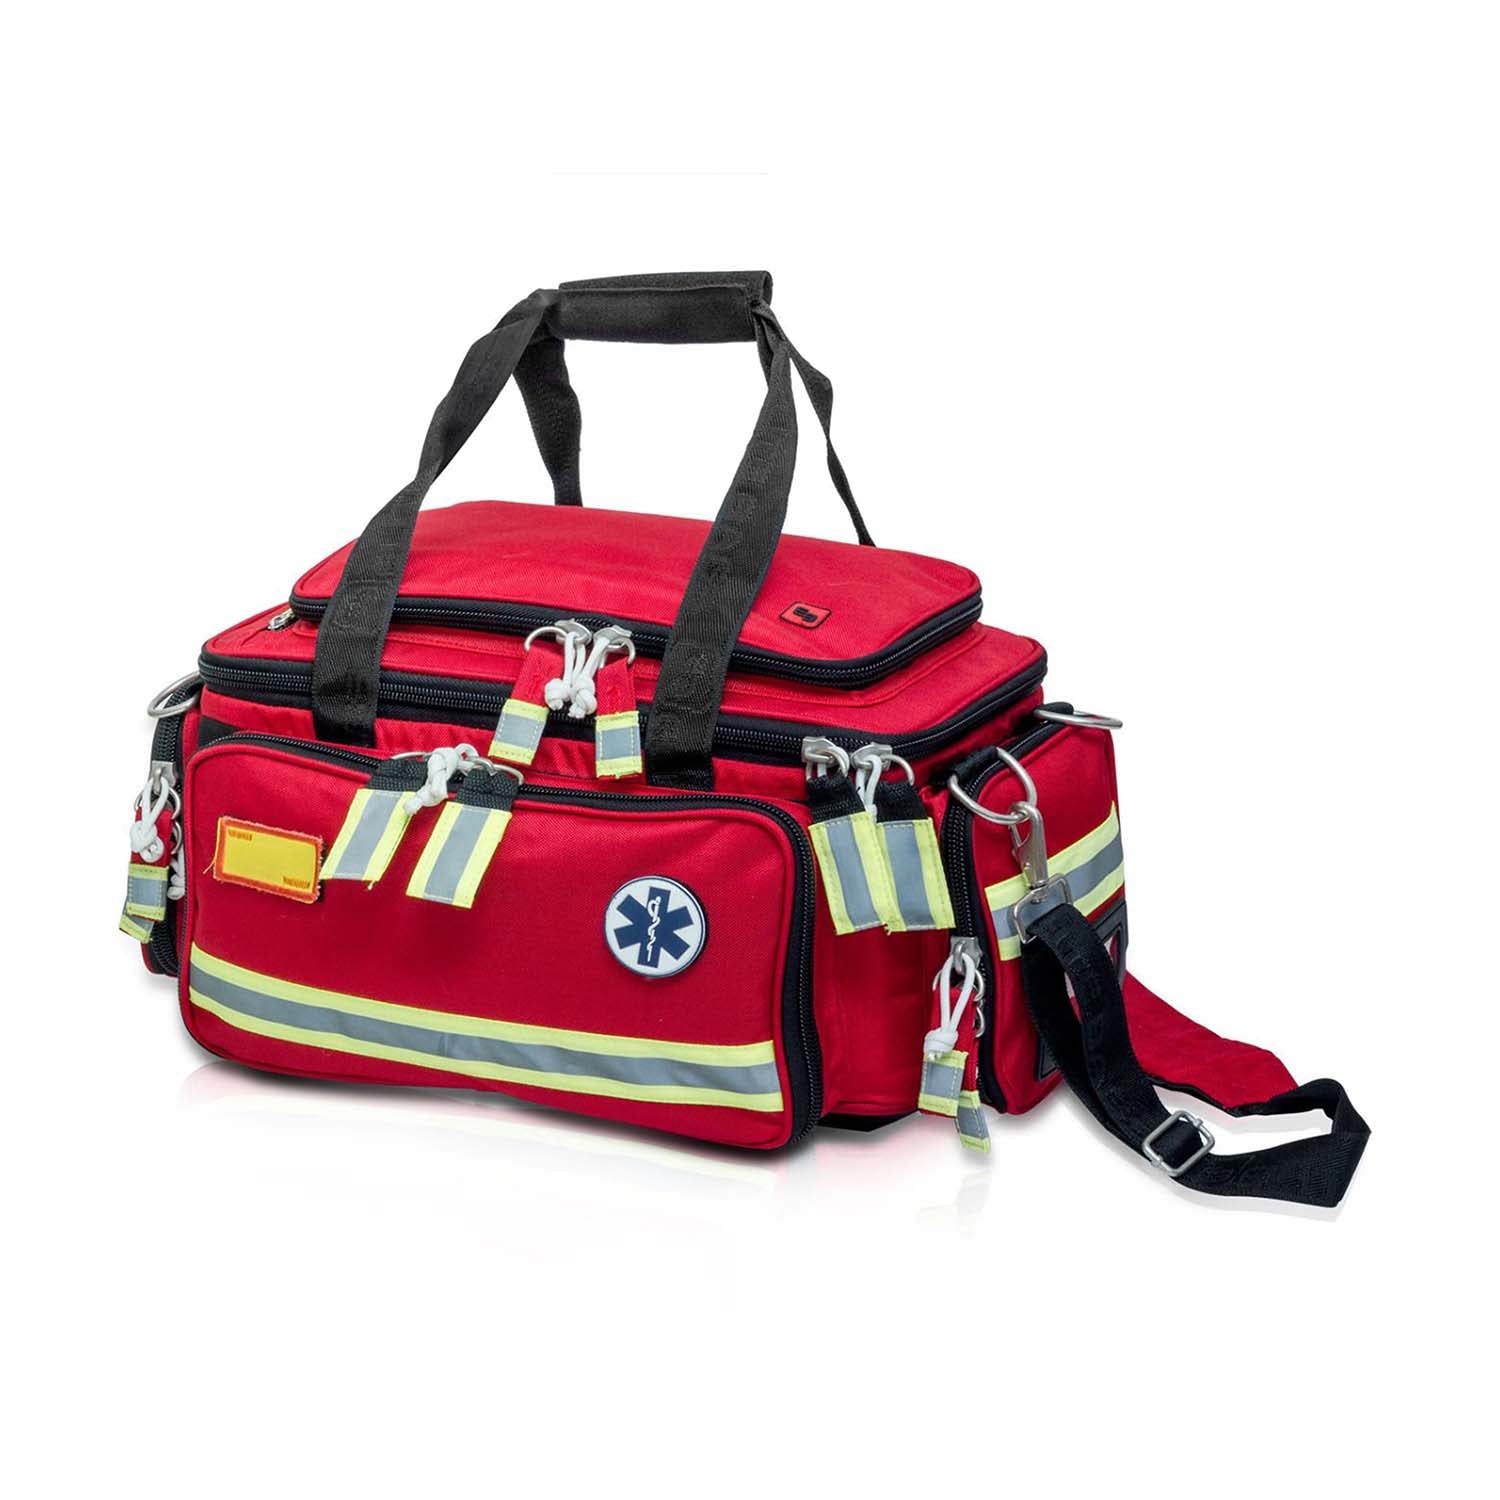 Emergency Bag for Basic Life Support | Red